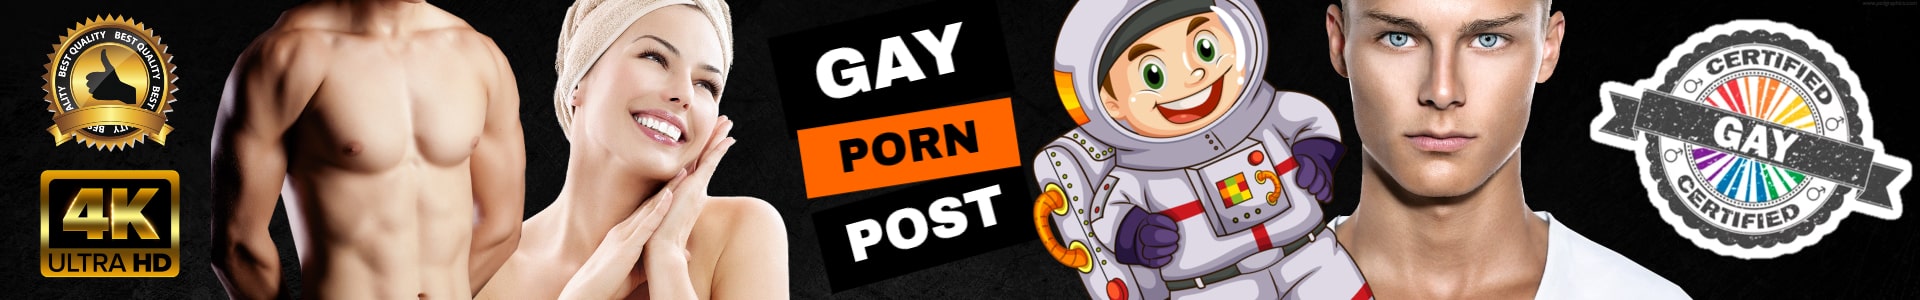 Gay porn pictures